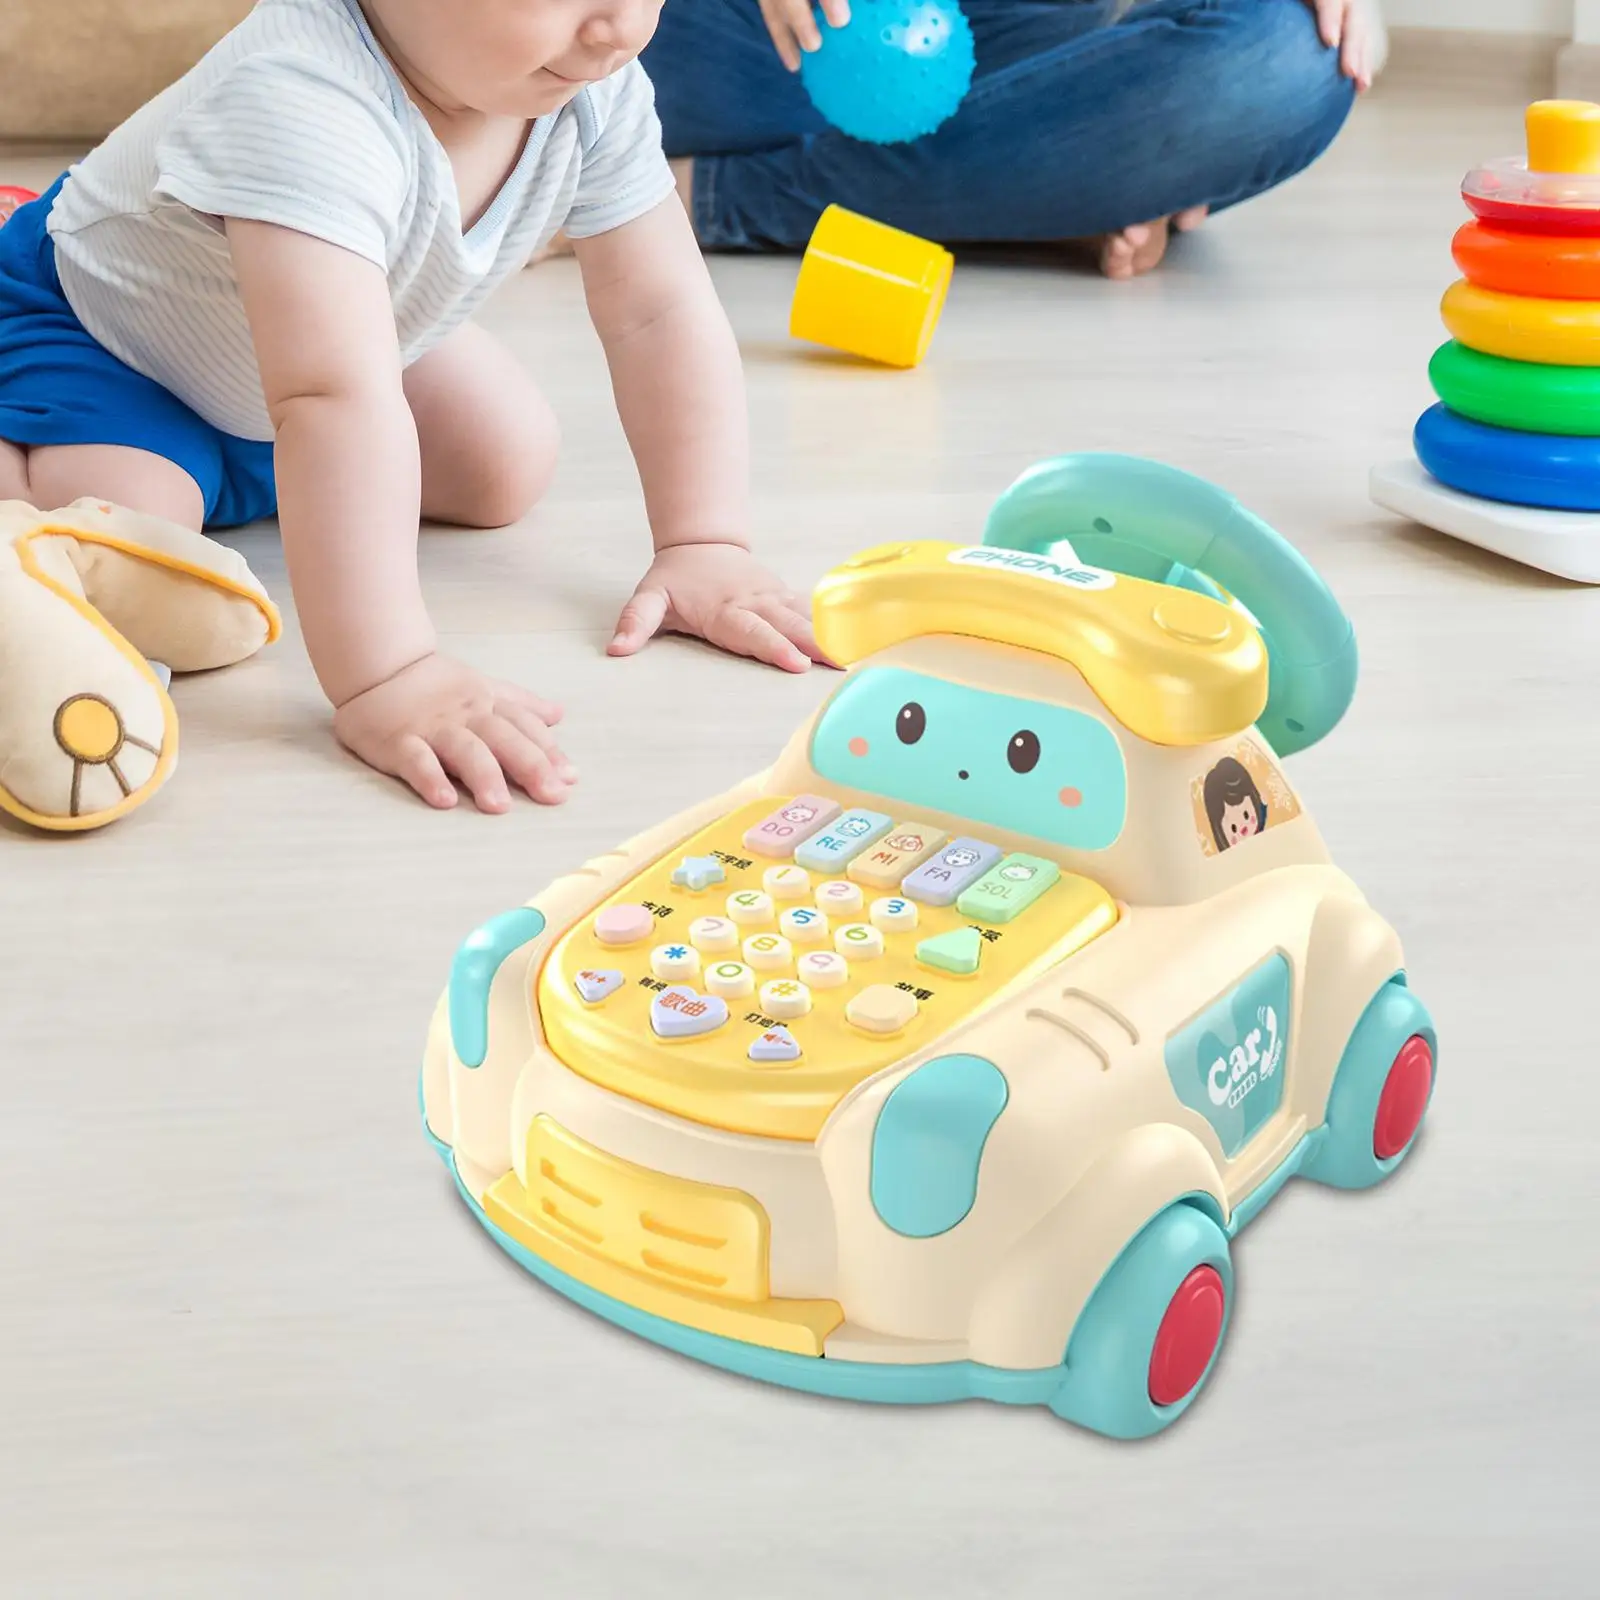 Children Phone Toy Movable Multifunctional Educational Baby Telephone Toy for Development Learning Education Activity Preschool